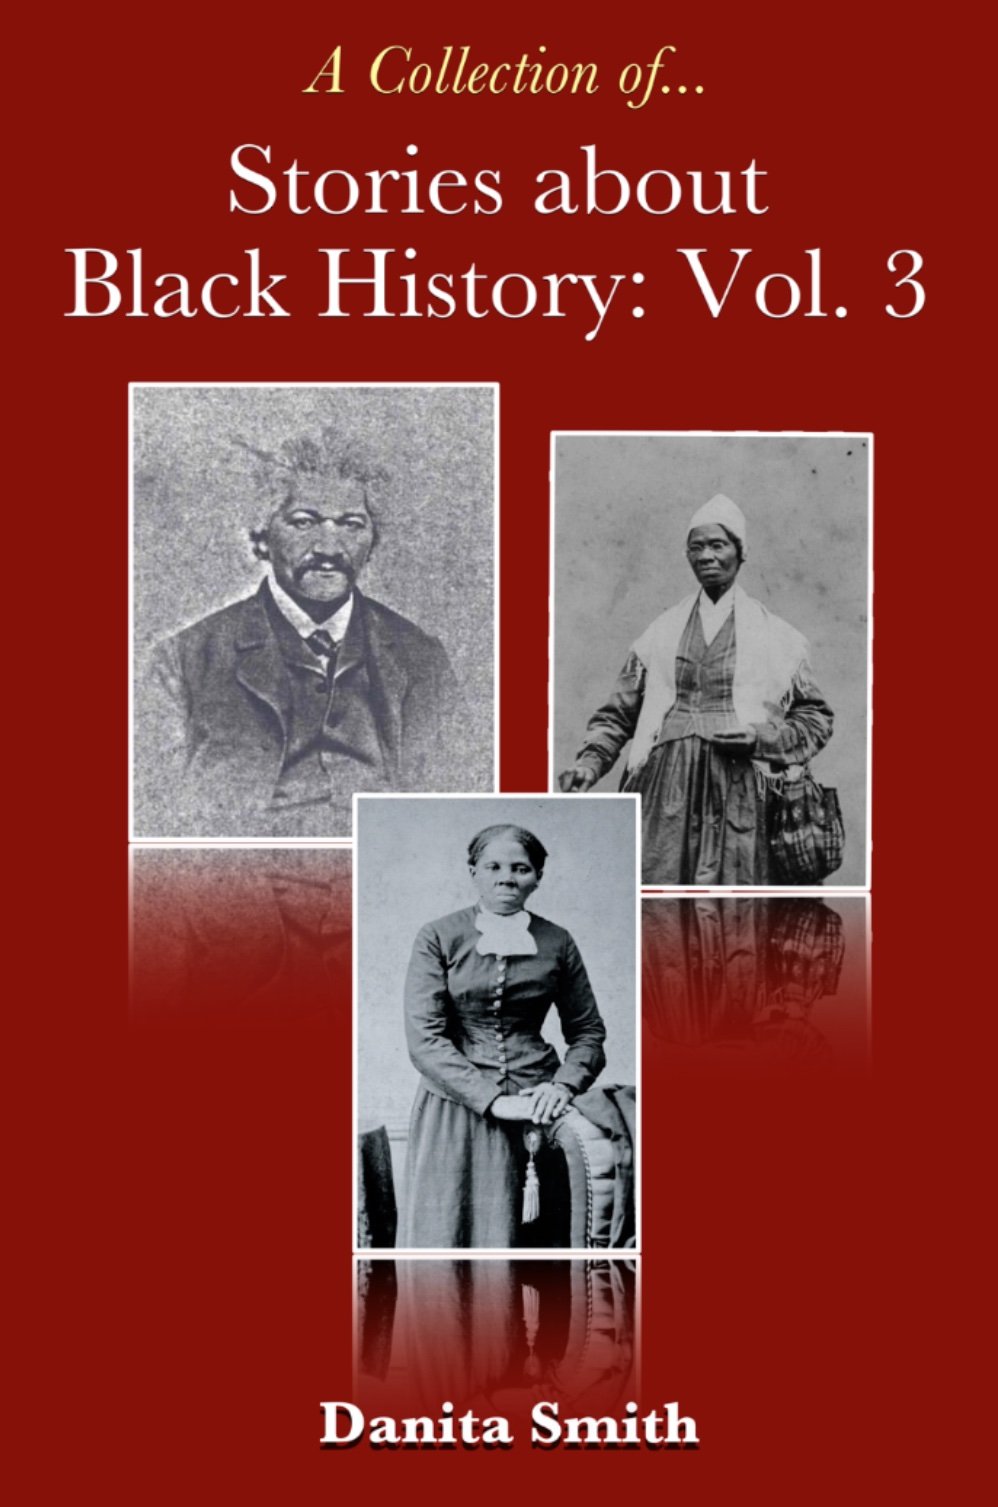 Stories about Black History Vol 3 - ECover.jpg